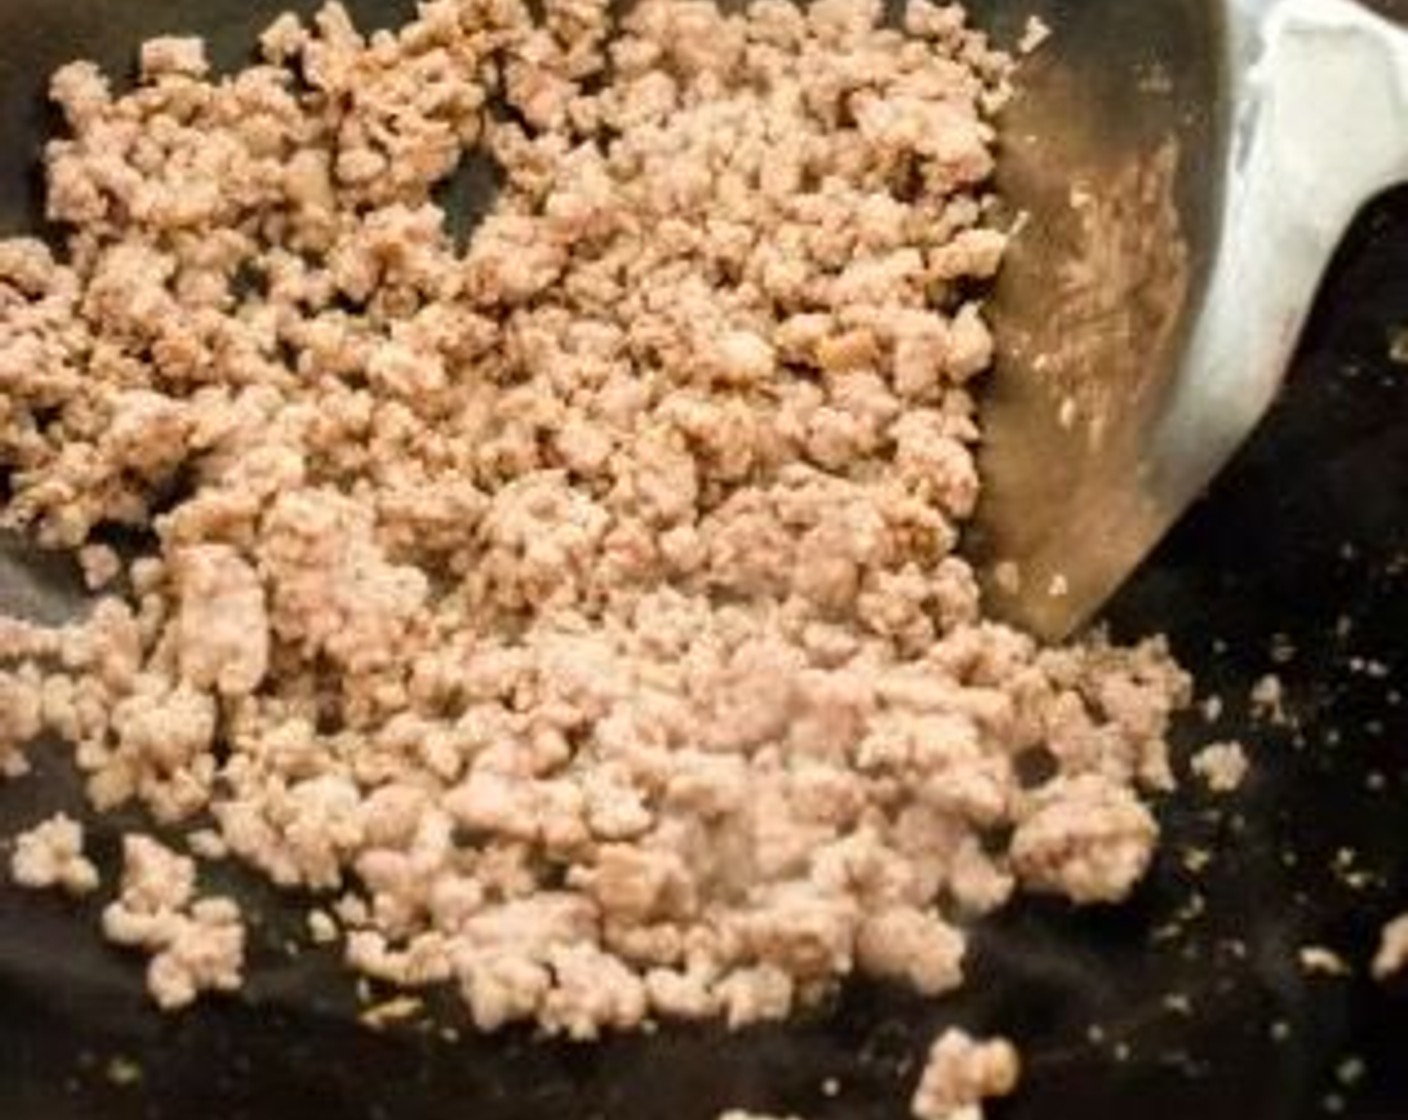 step 2 Heat 2 tablespoons of Cooking Oil (2 Tbsp) in a wok over medium-high heat. Add Ground Pork (8 oz), and stir-fry until the pork is fully cooked. Remove the ground pork from the wok and set aside.